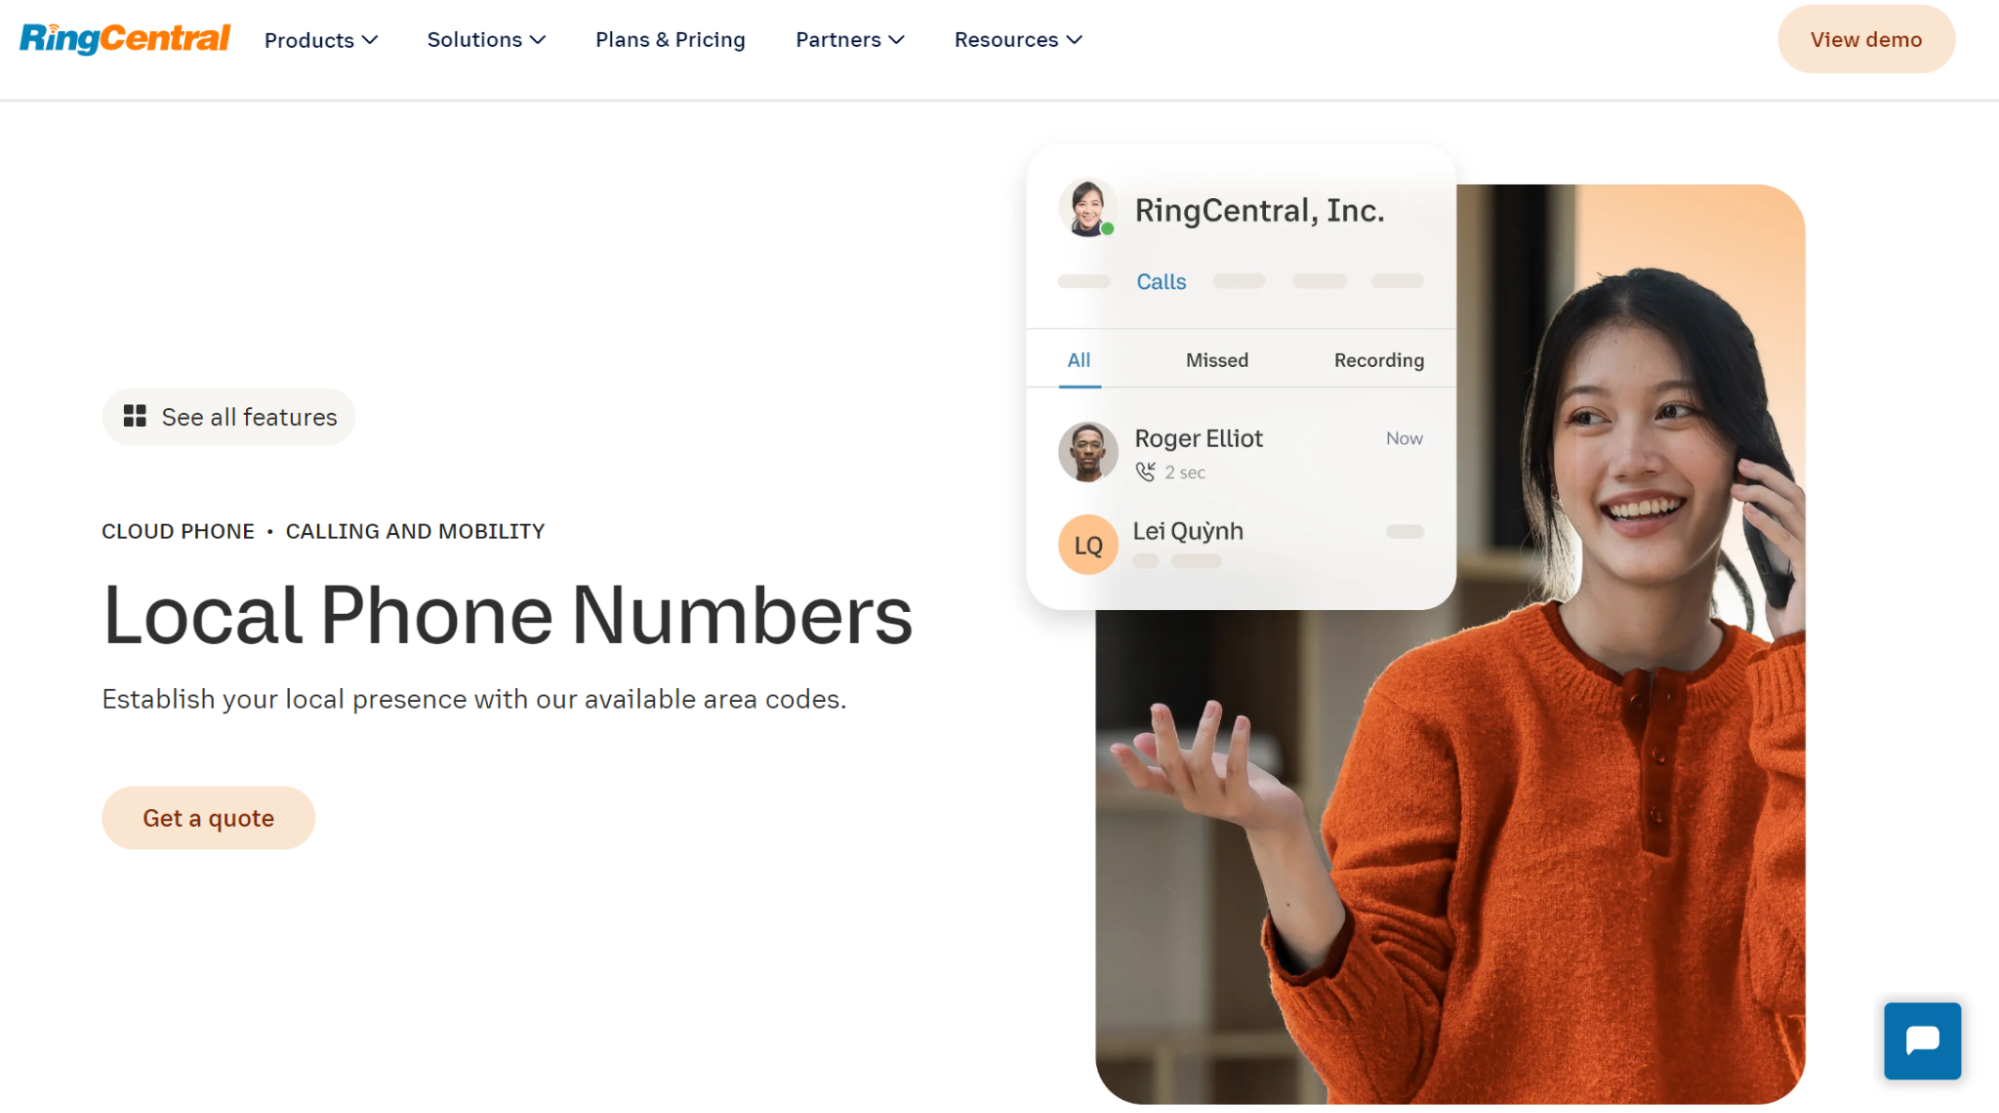 RingCentral local phone numbers landing page